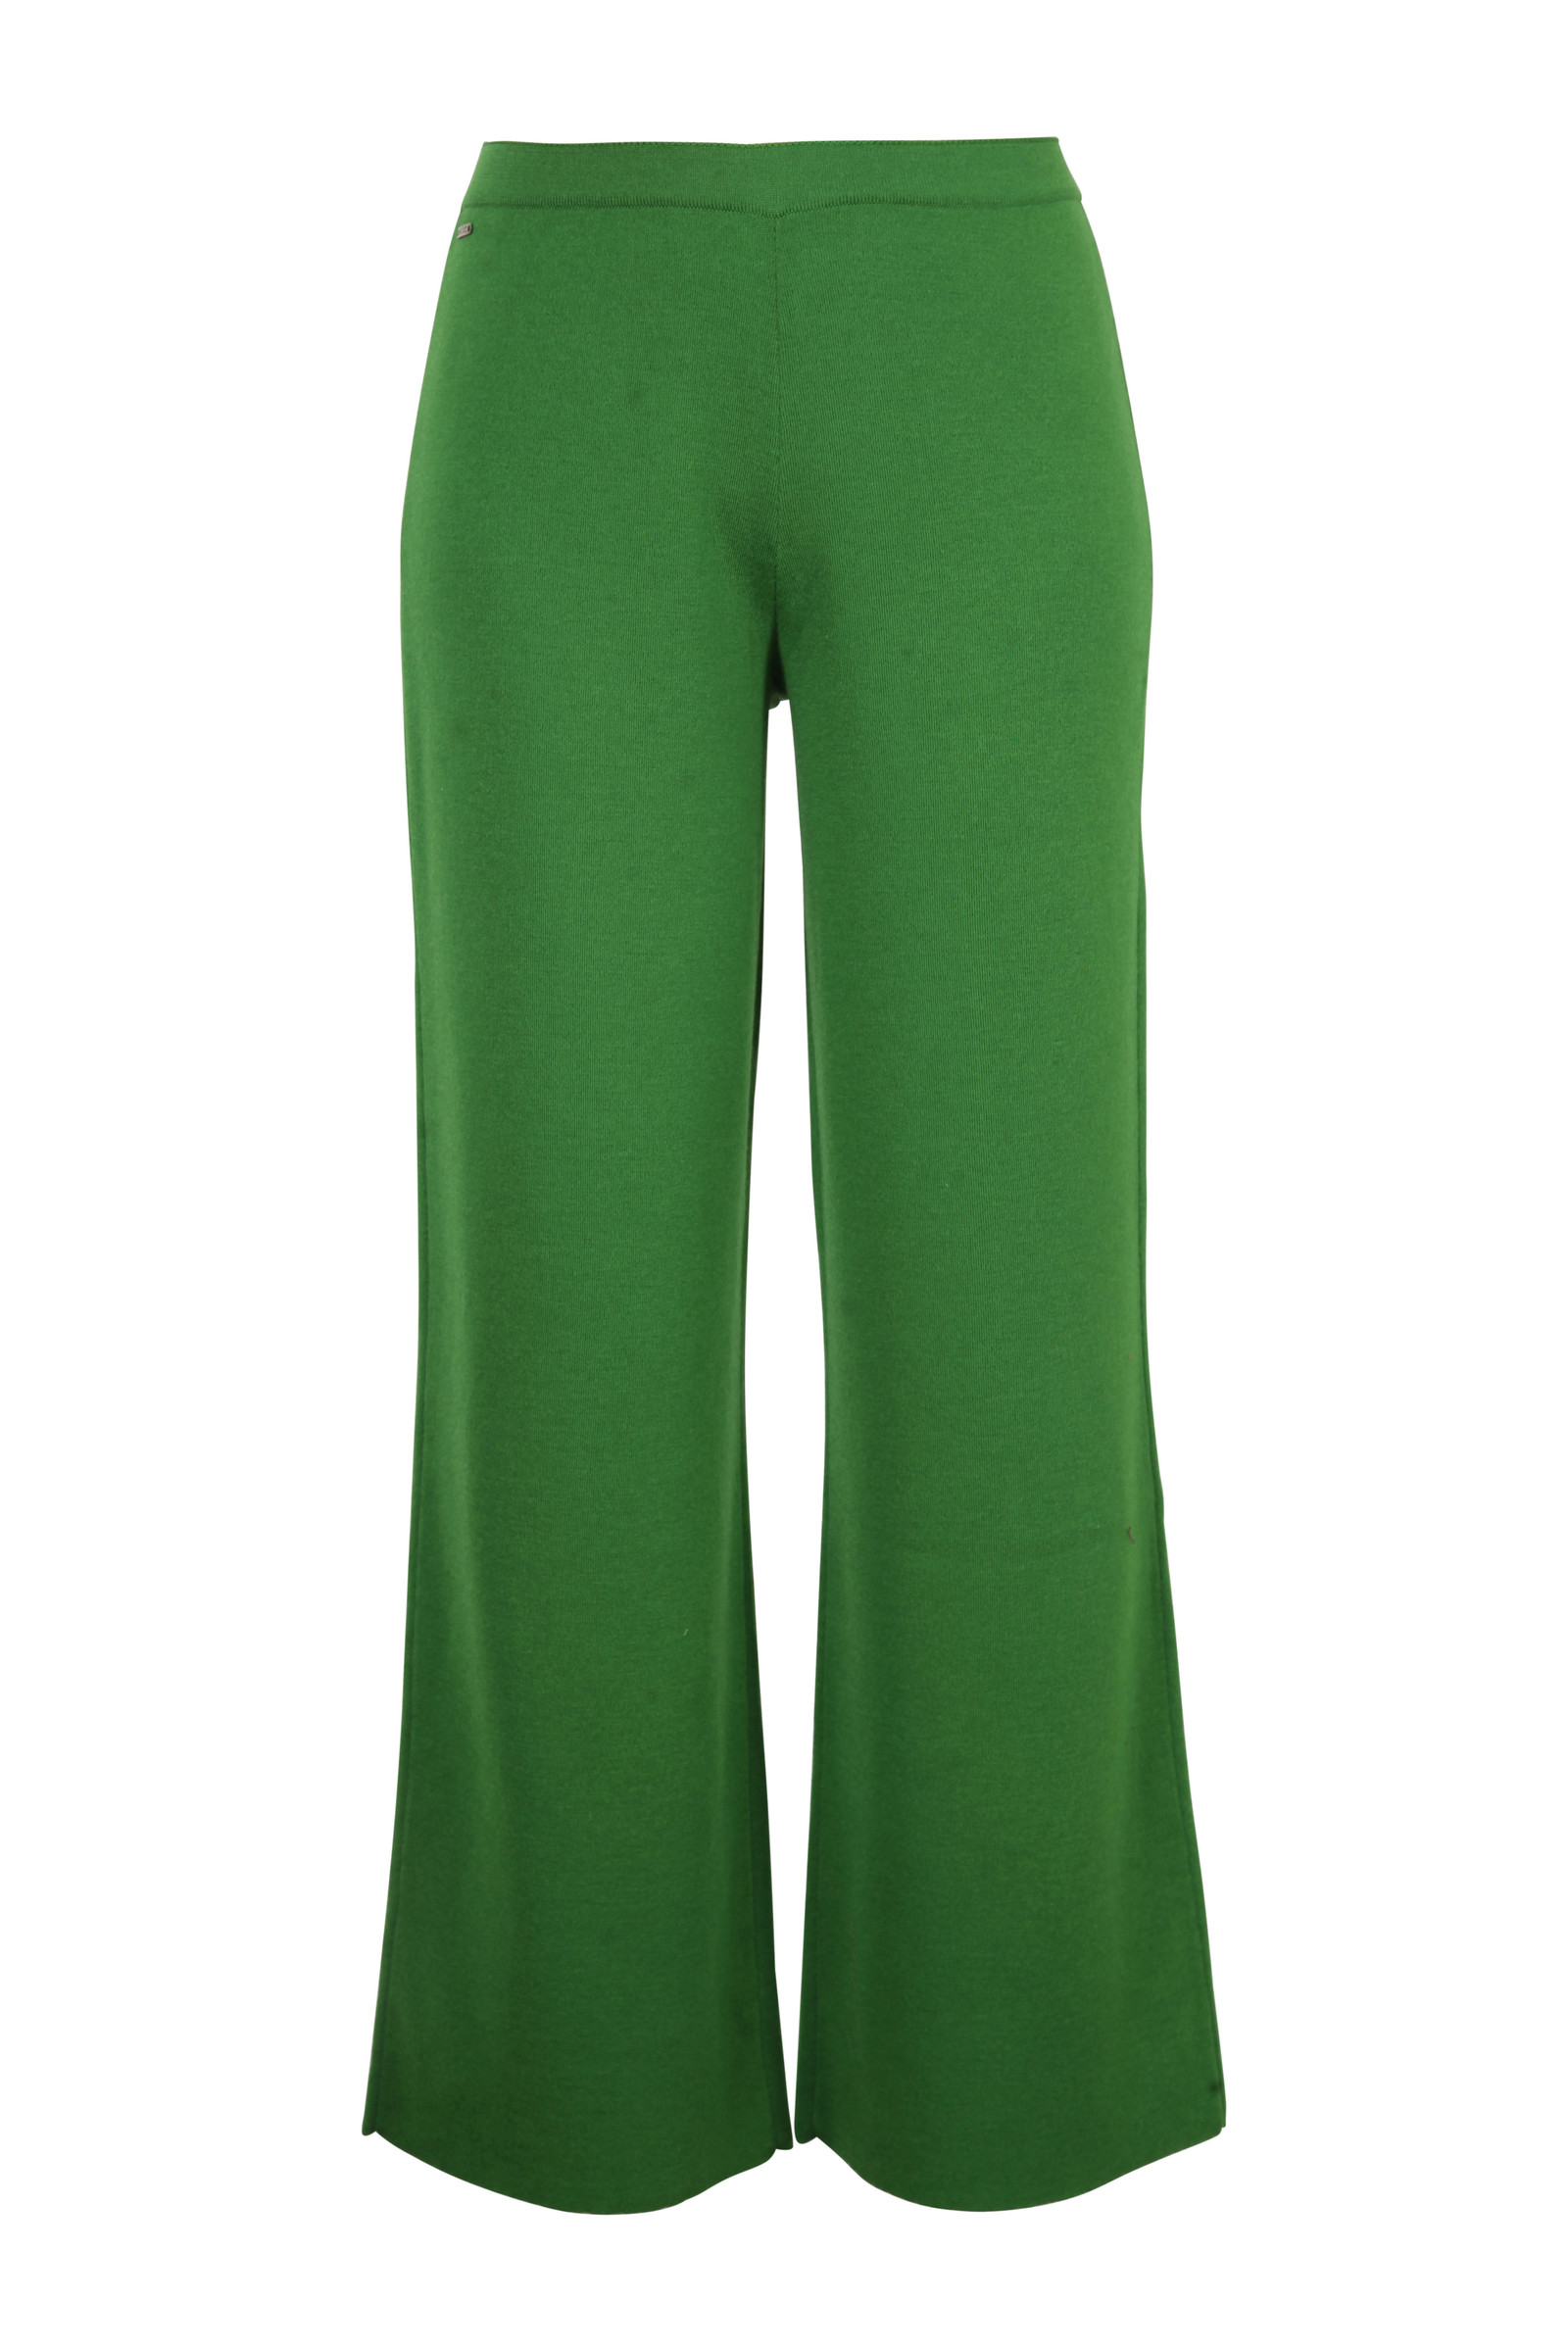 IVKO  Woman IVKO Outlet - Solid Knitted Pants Green